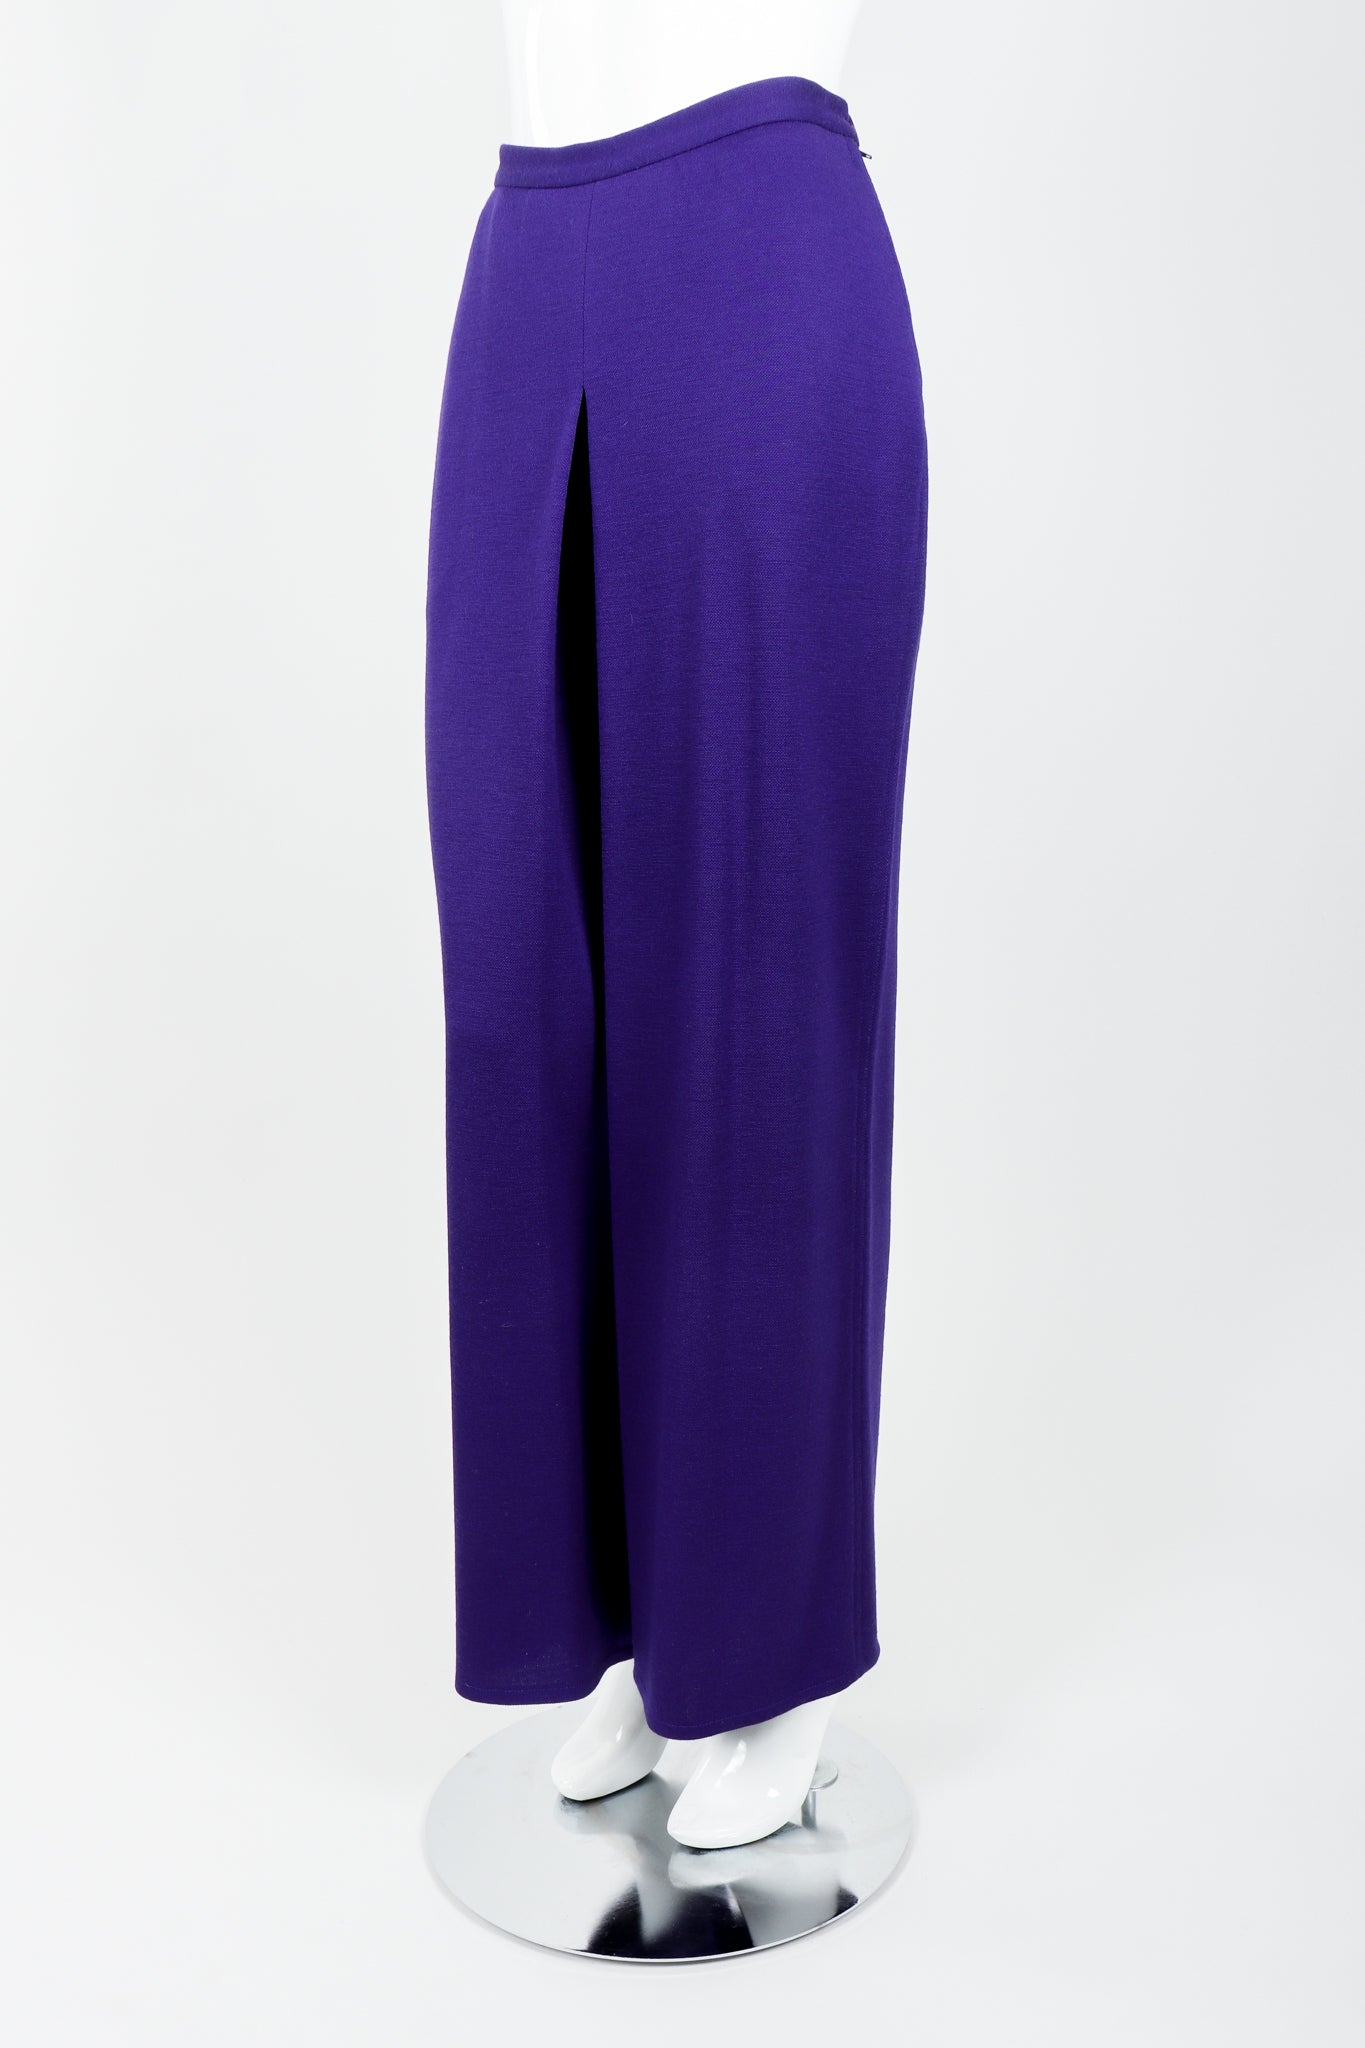 Vintage Sonia Rykiel Purple Knit Relaxed Straight Inverted Pleat Pant on mannequin side at Recess